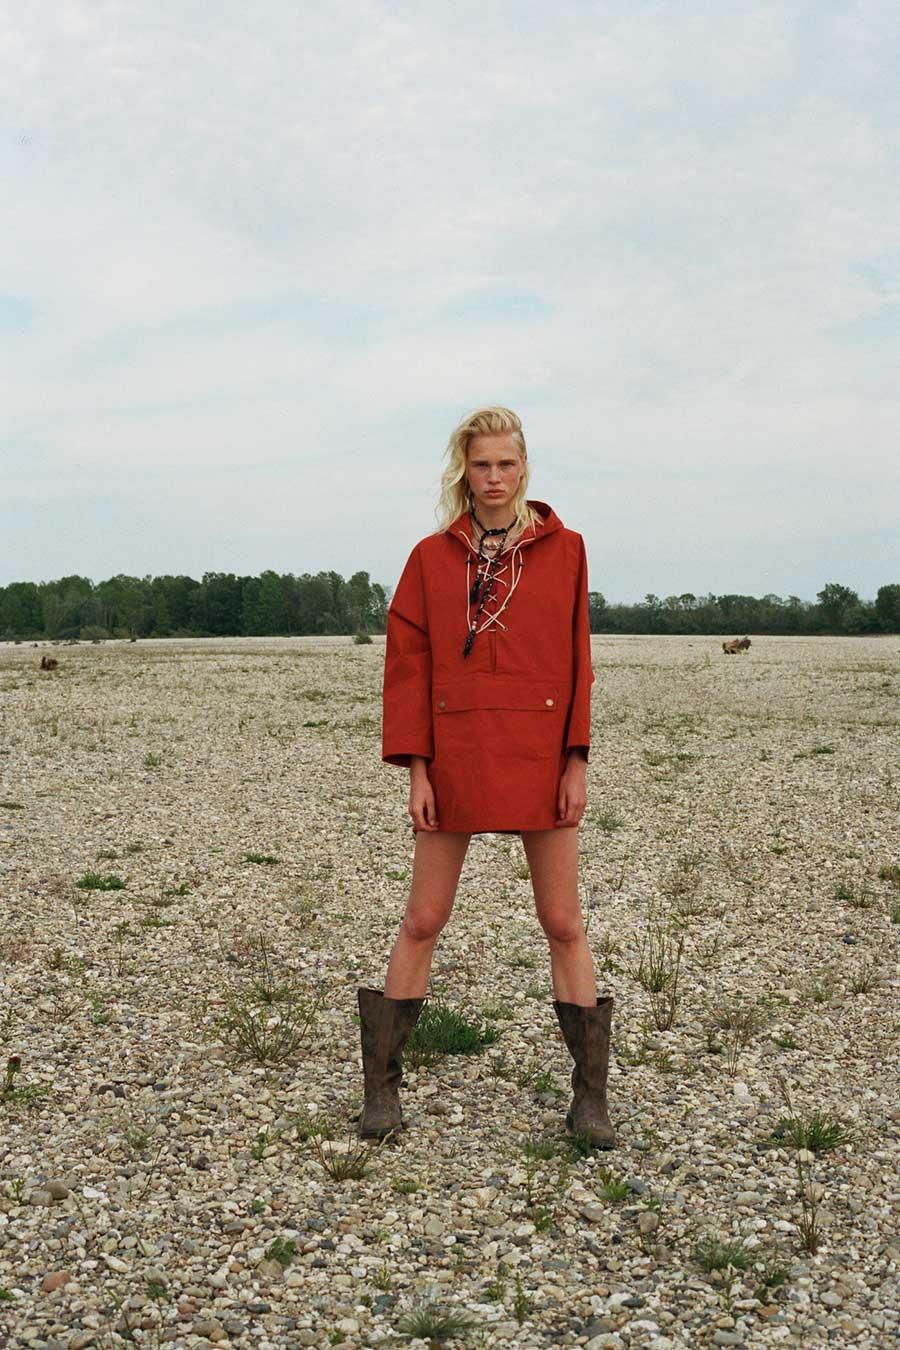 Clothing: Jacket by Barbour; Accessories by ALANUI; Boots by Blundstone. Model: Fien Kloos. Stylist: Giulia Malnati. Hair Stylist: Alessia Bonotto. Makeup Artist: Angela Montorfano